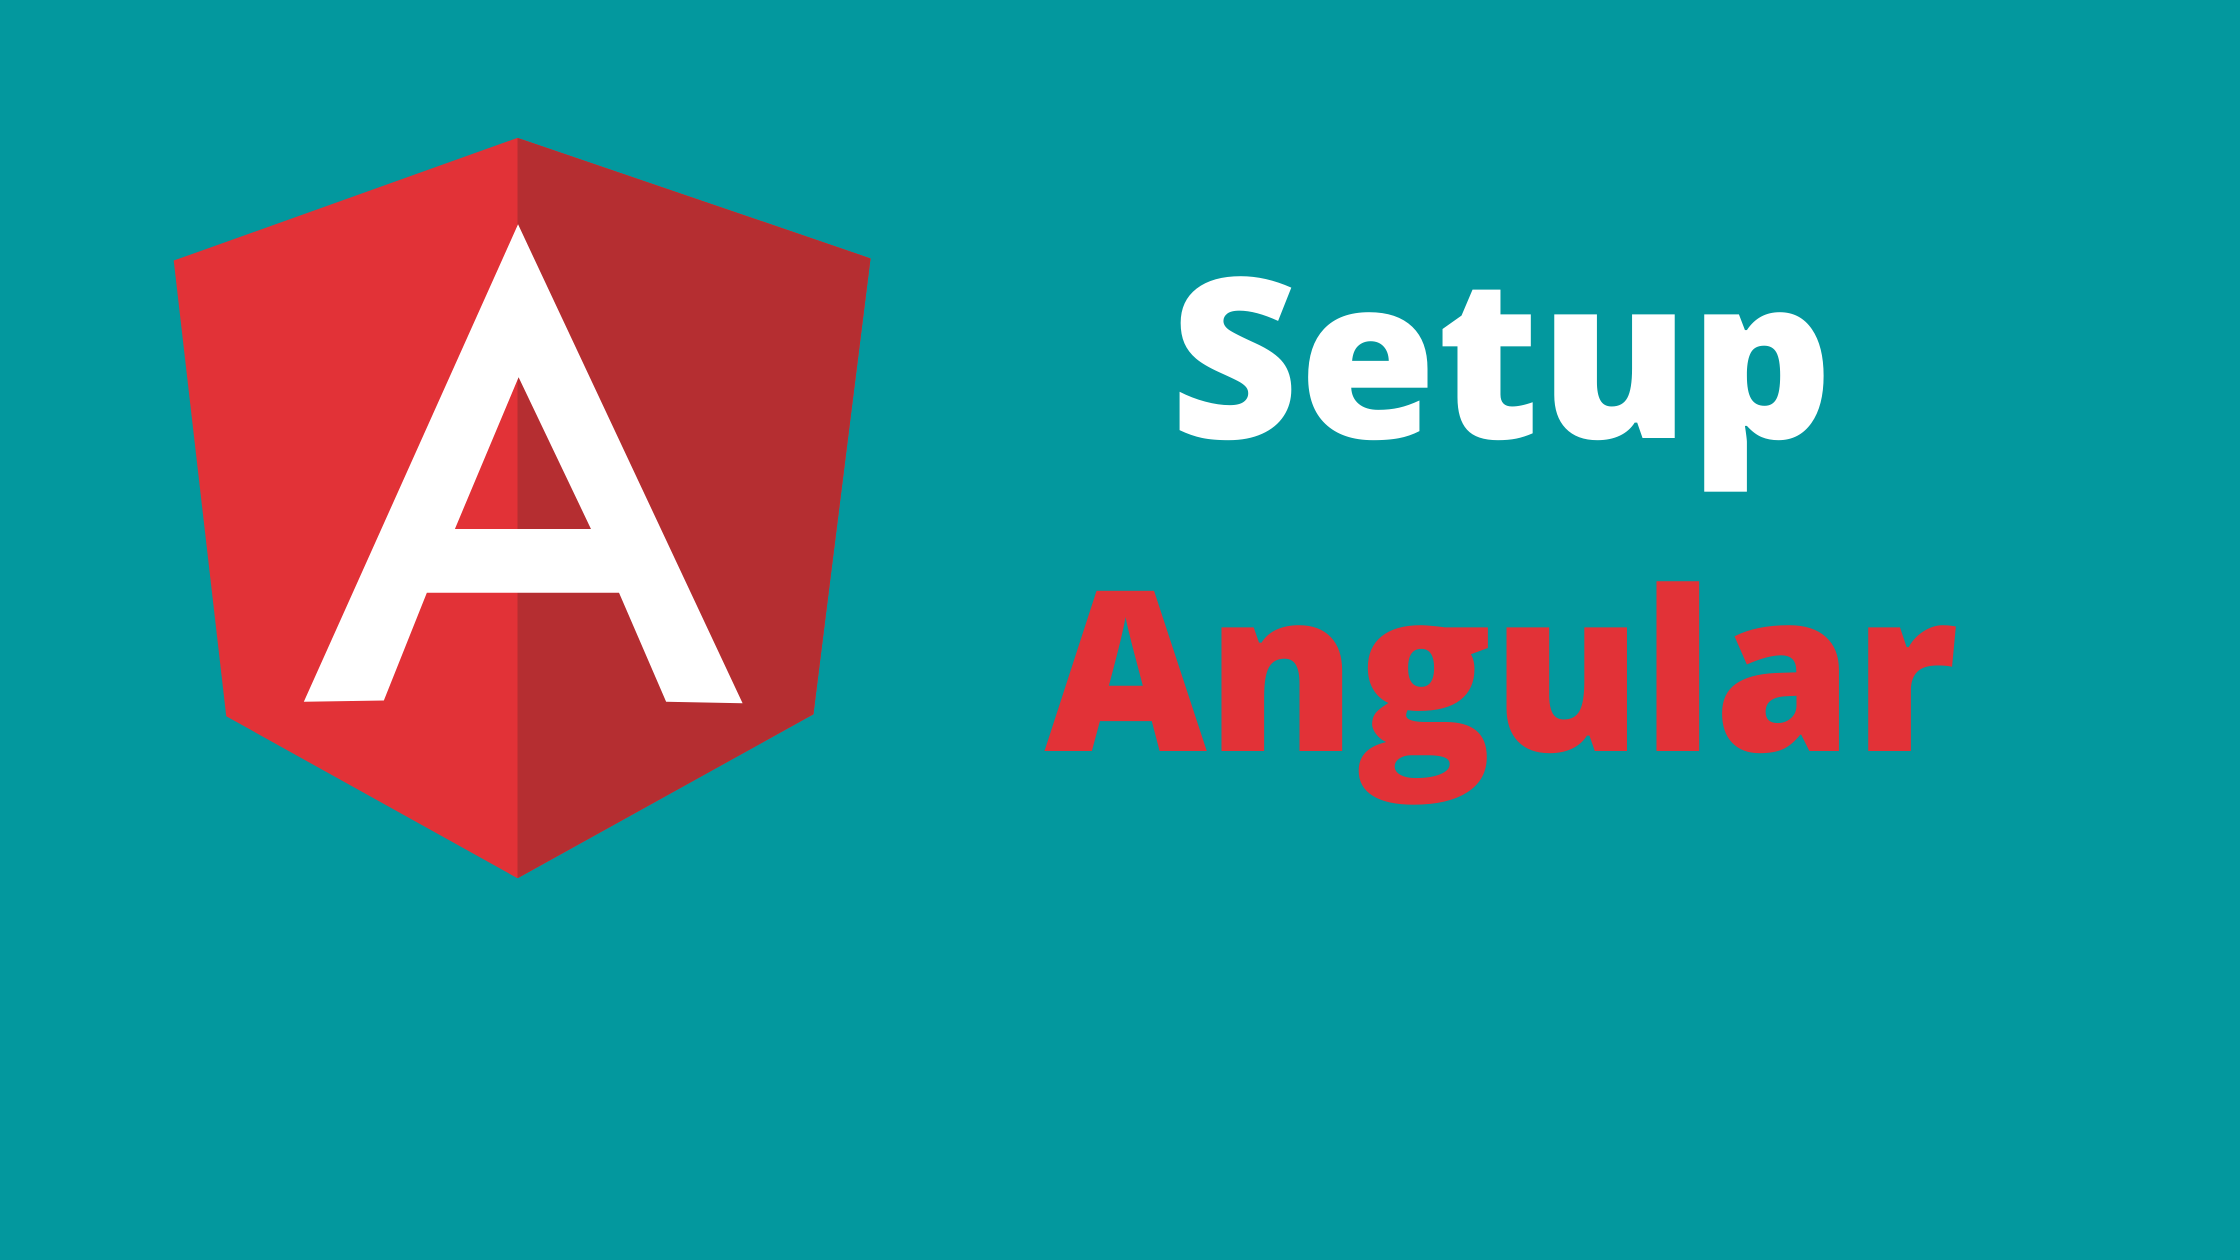 How to install angular in windows